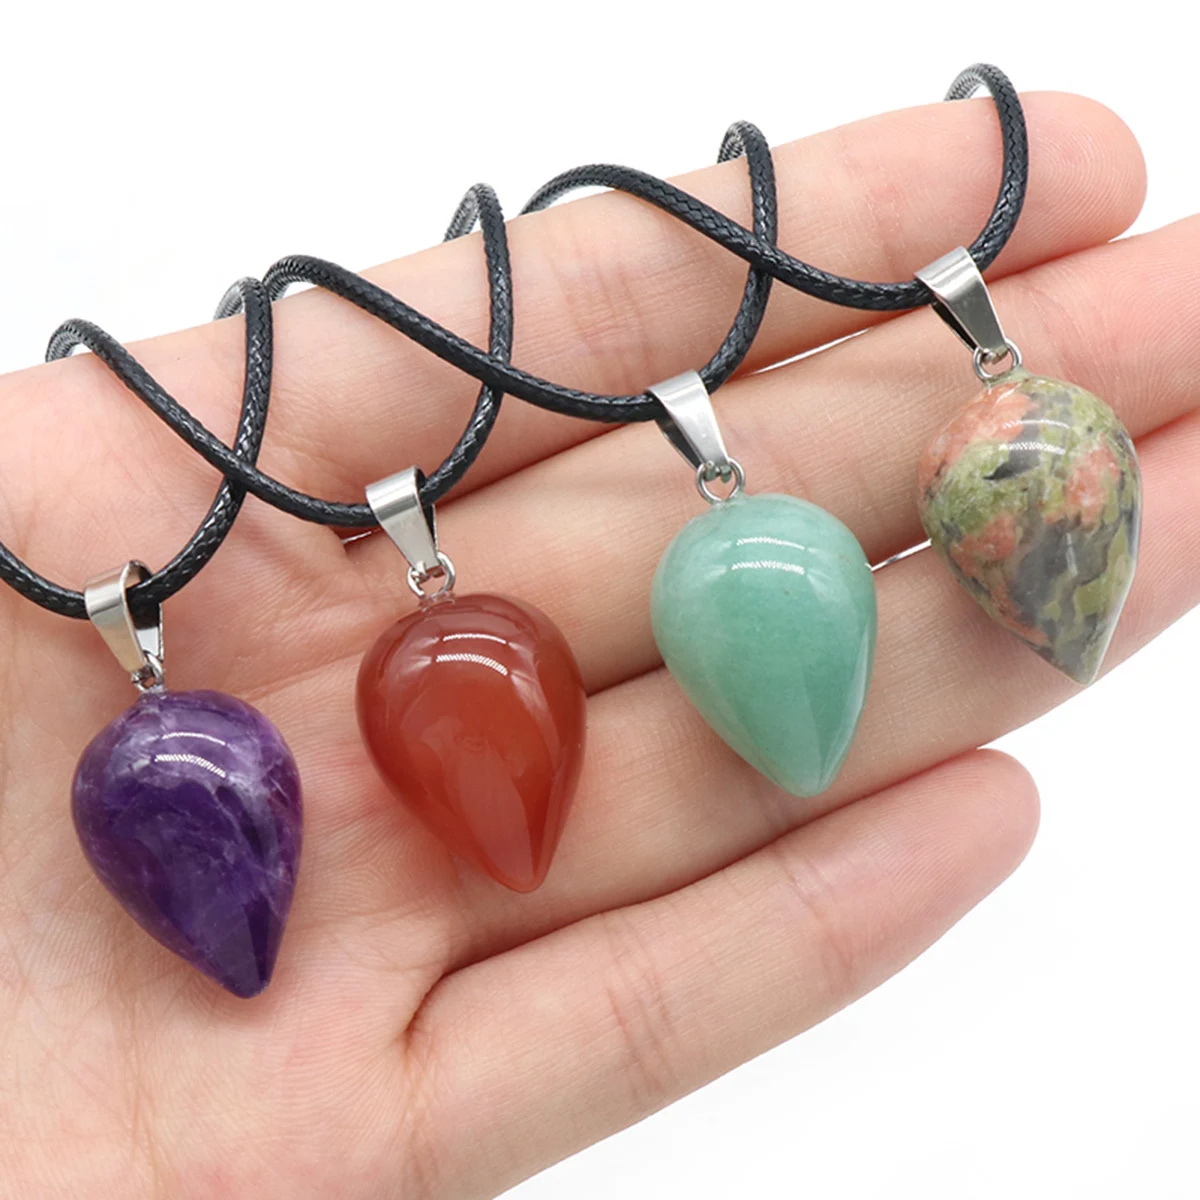 

1/2pc Natural Stone Pendant Crystals Rose Quartz Agate Amethyst Charms Long Rope Chains Pendant Necklaces For Women Jewelry